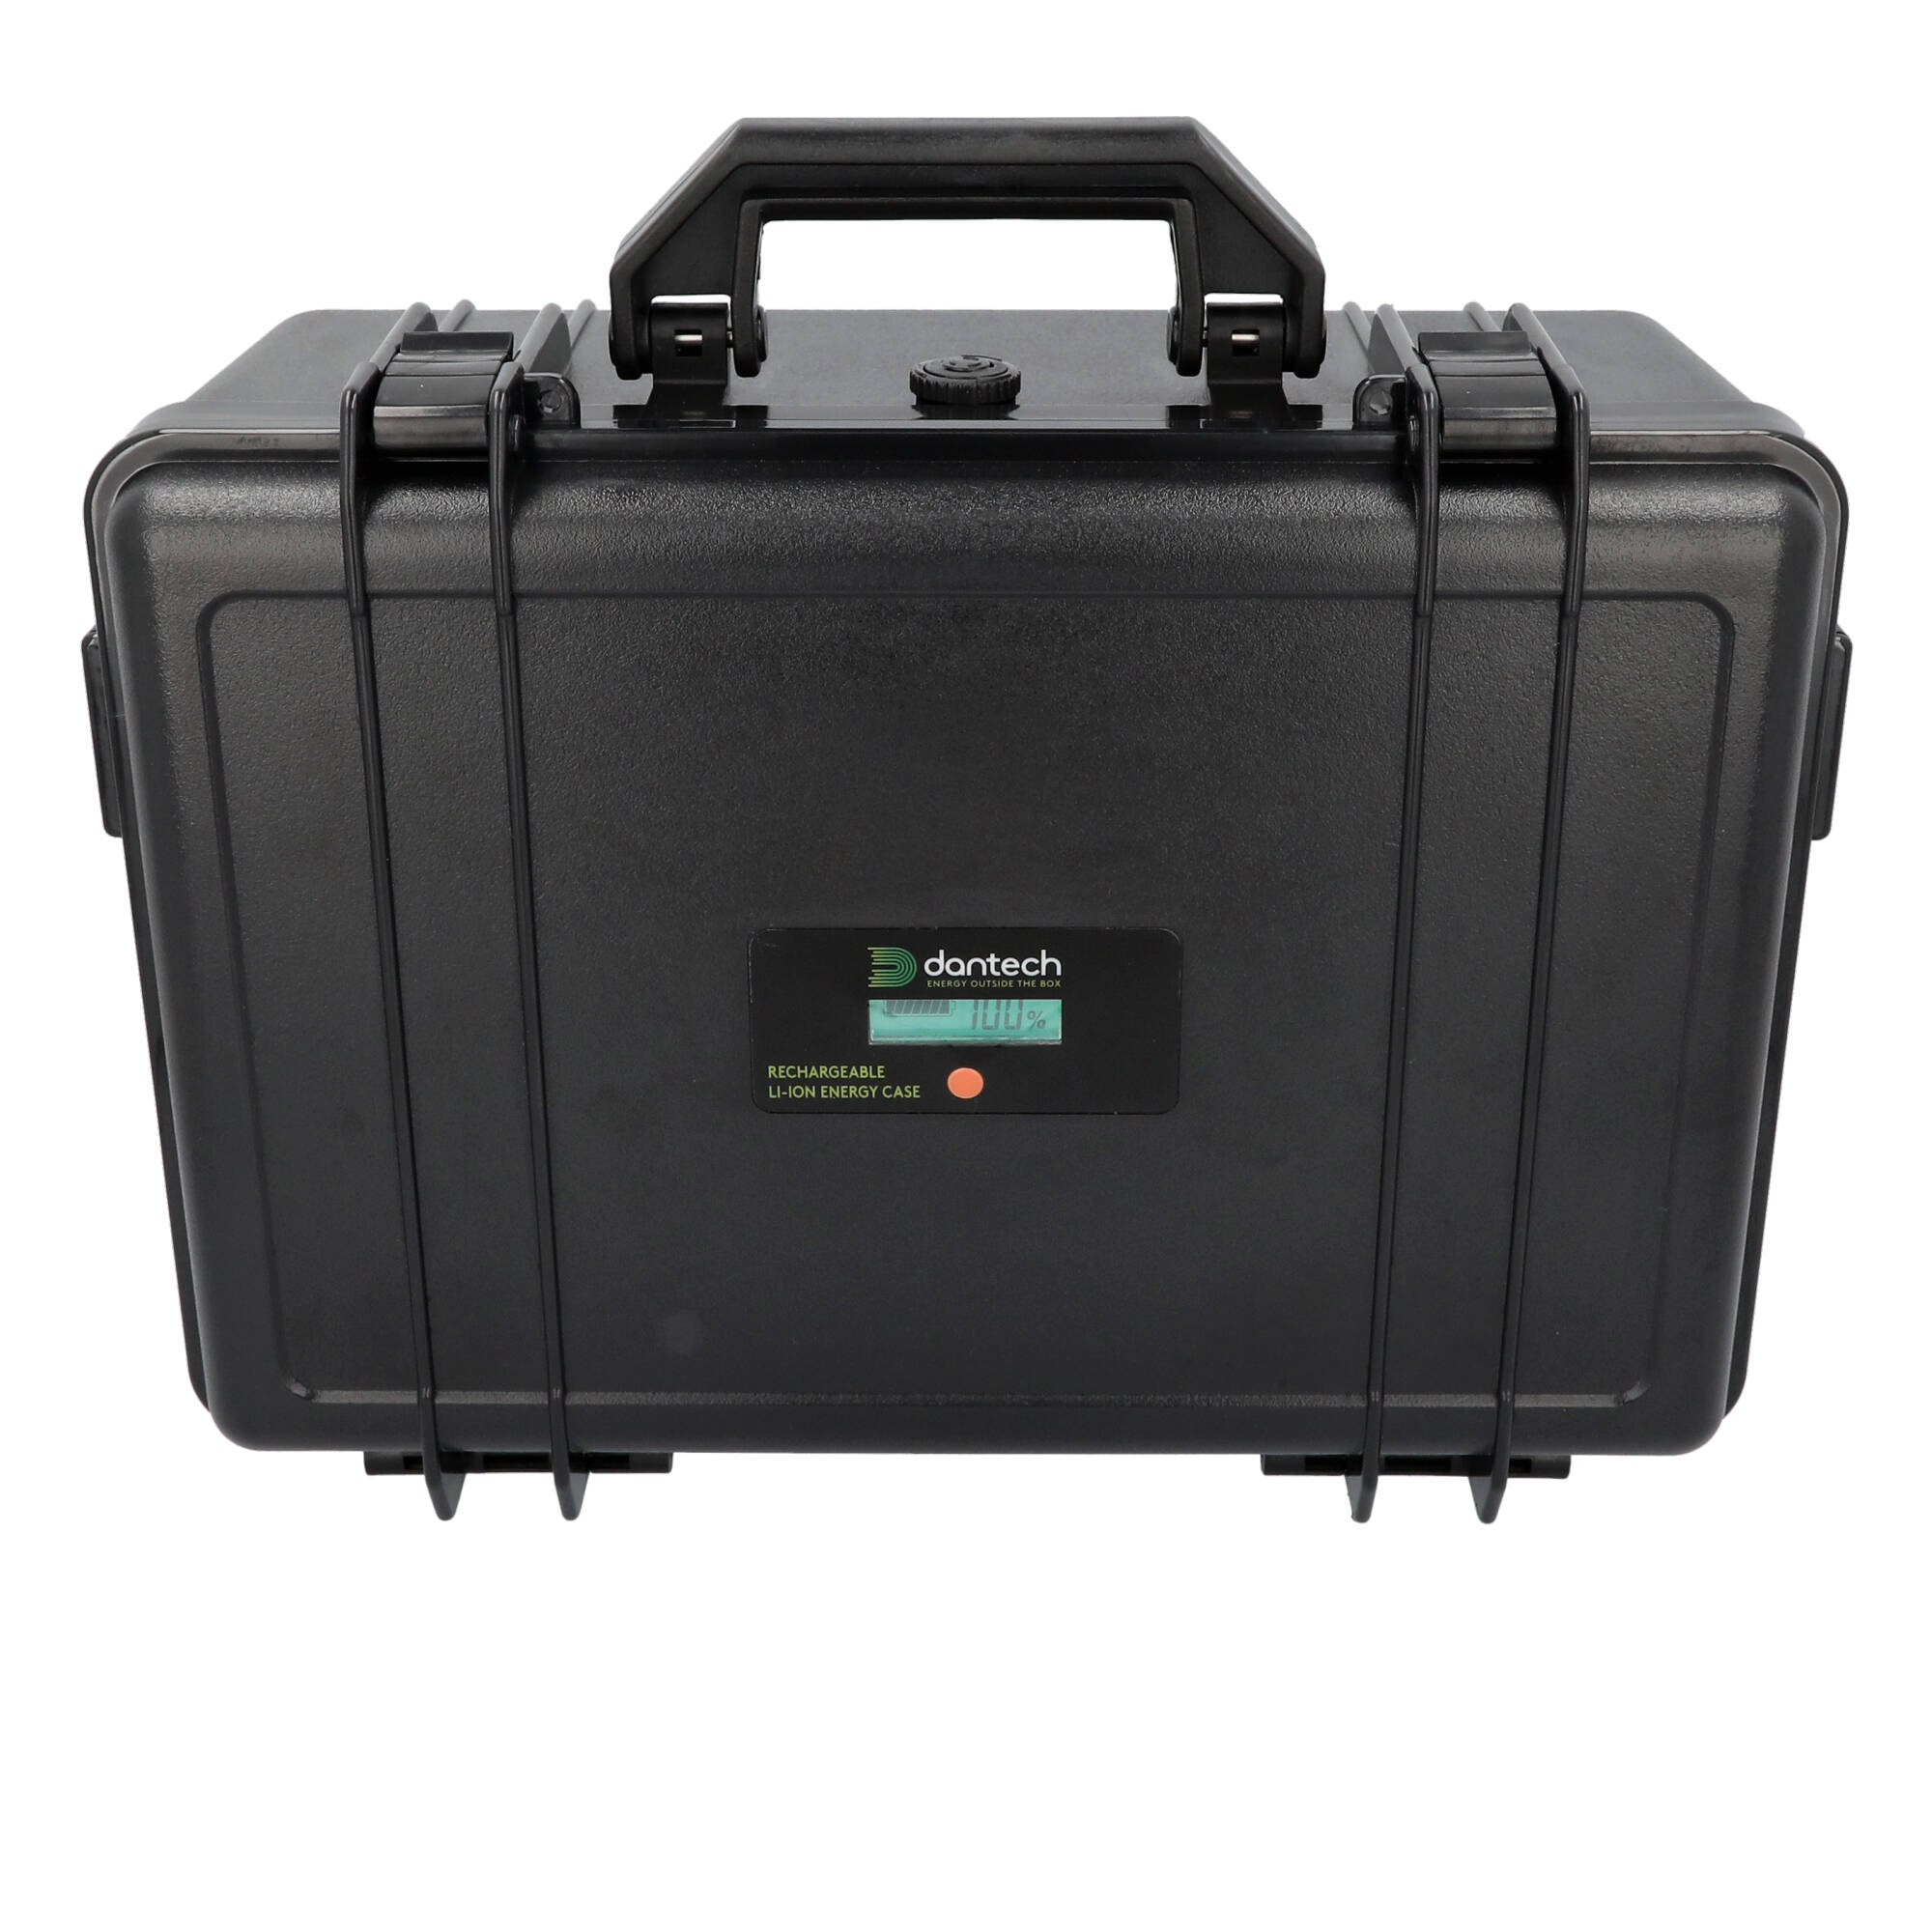 EP-1400Wh: Battery case Power Station 24V 55Ah BMS 60A with M50T (1500 Watt) 390 x 293 x 172 mm